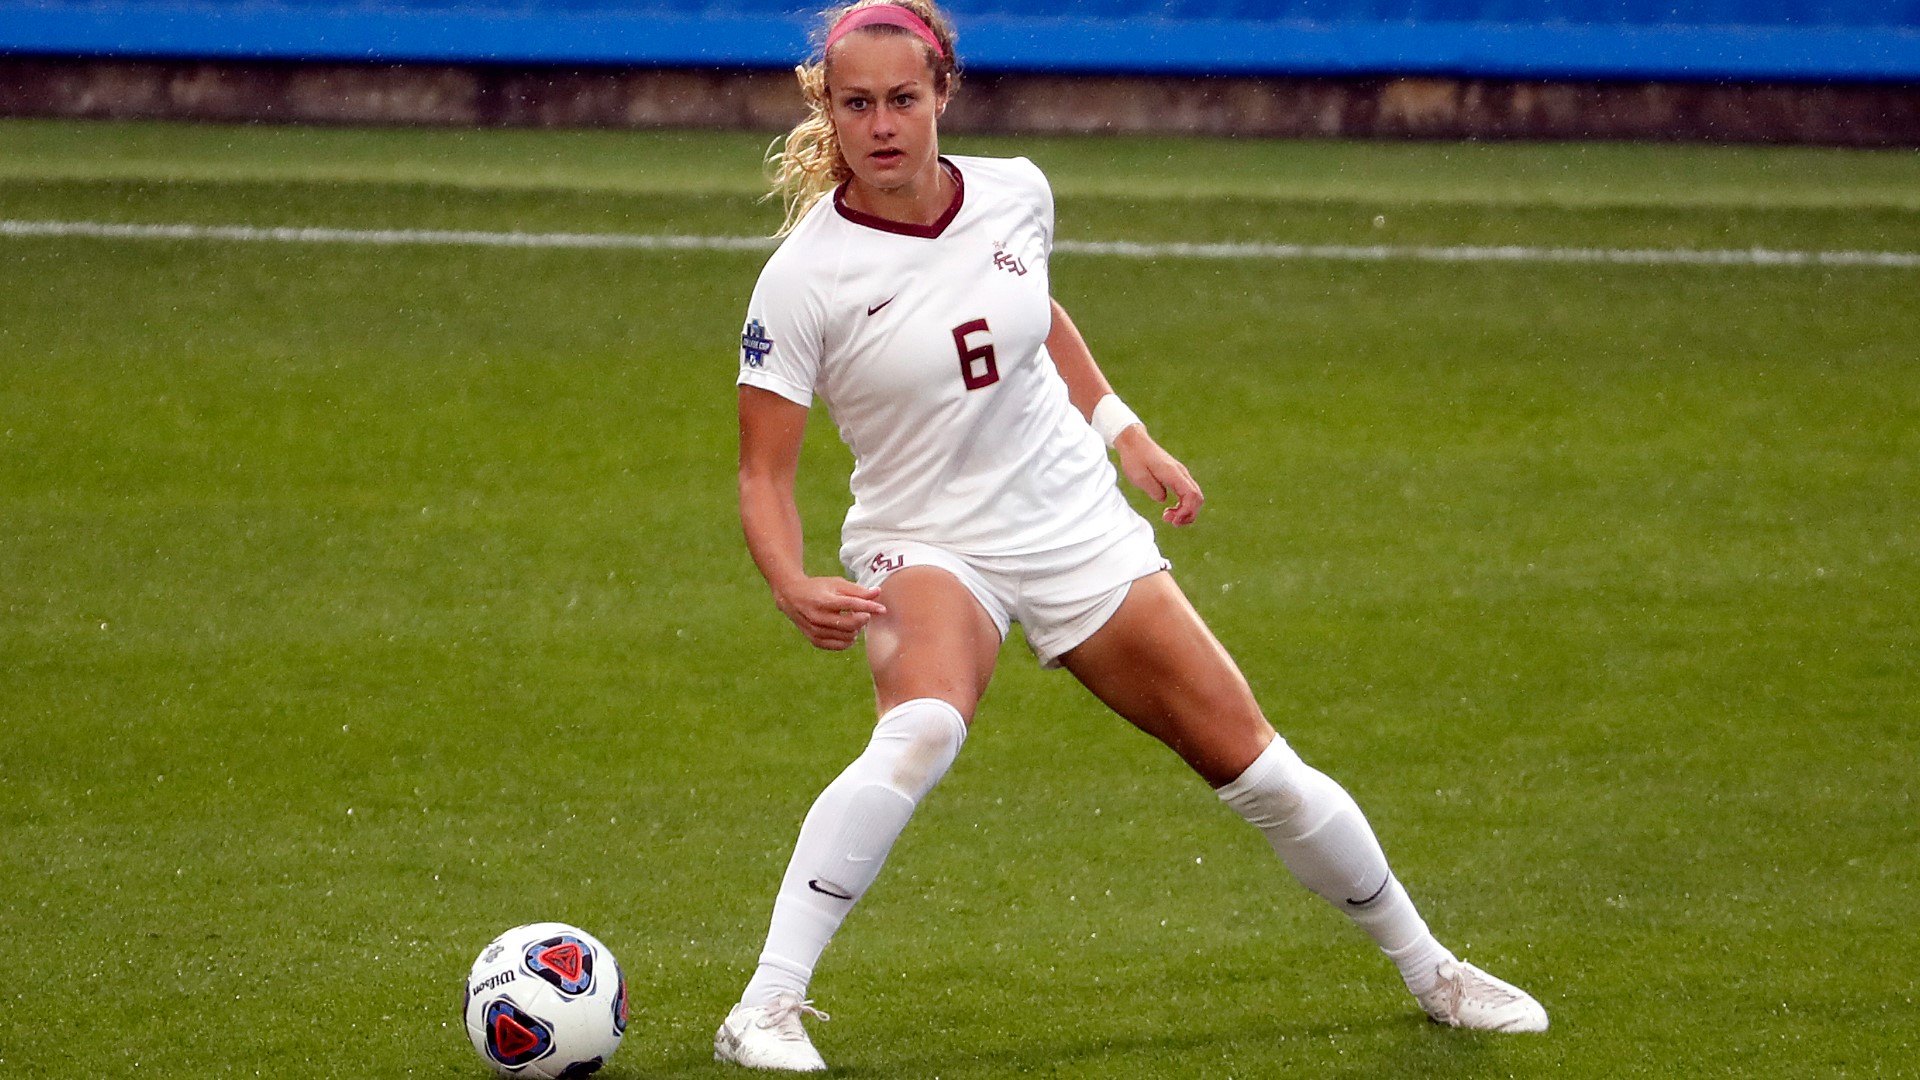 The Northern Colorado native joined elite company this year when she won her second-consecutive MAC Hermann Trophy for the nation's top collegiate soccer player.